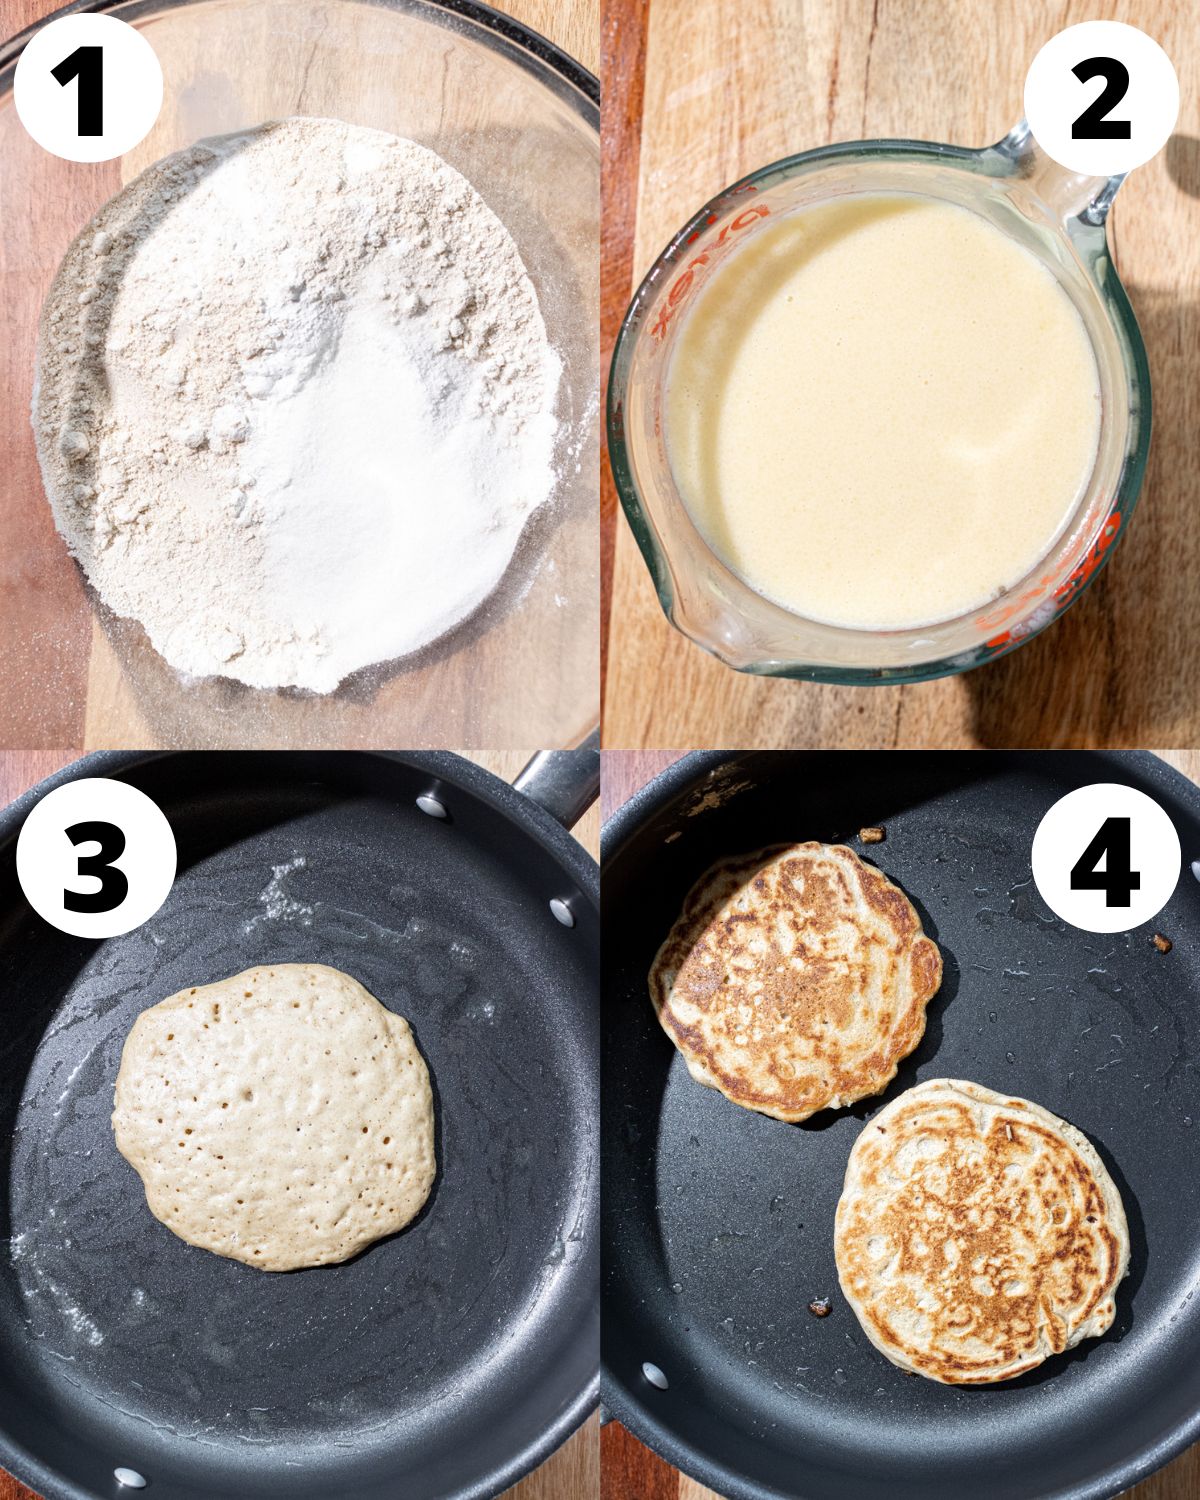 Cooking process for oat flour pancakes pictured in four steps